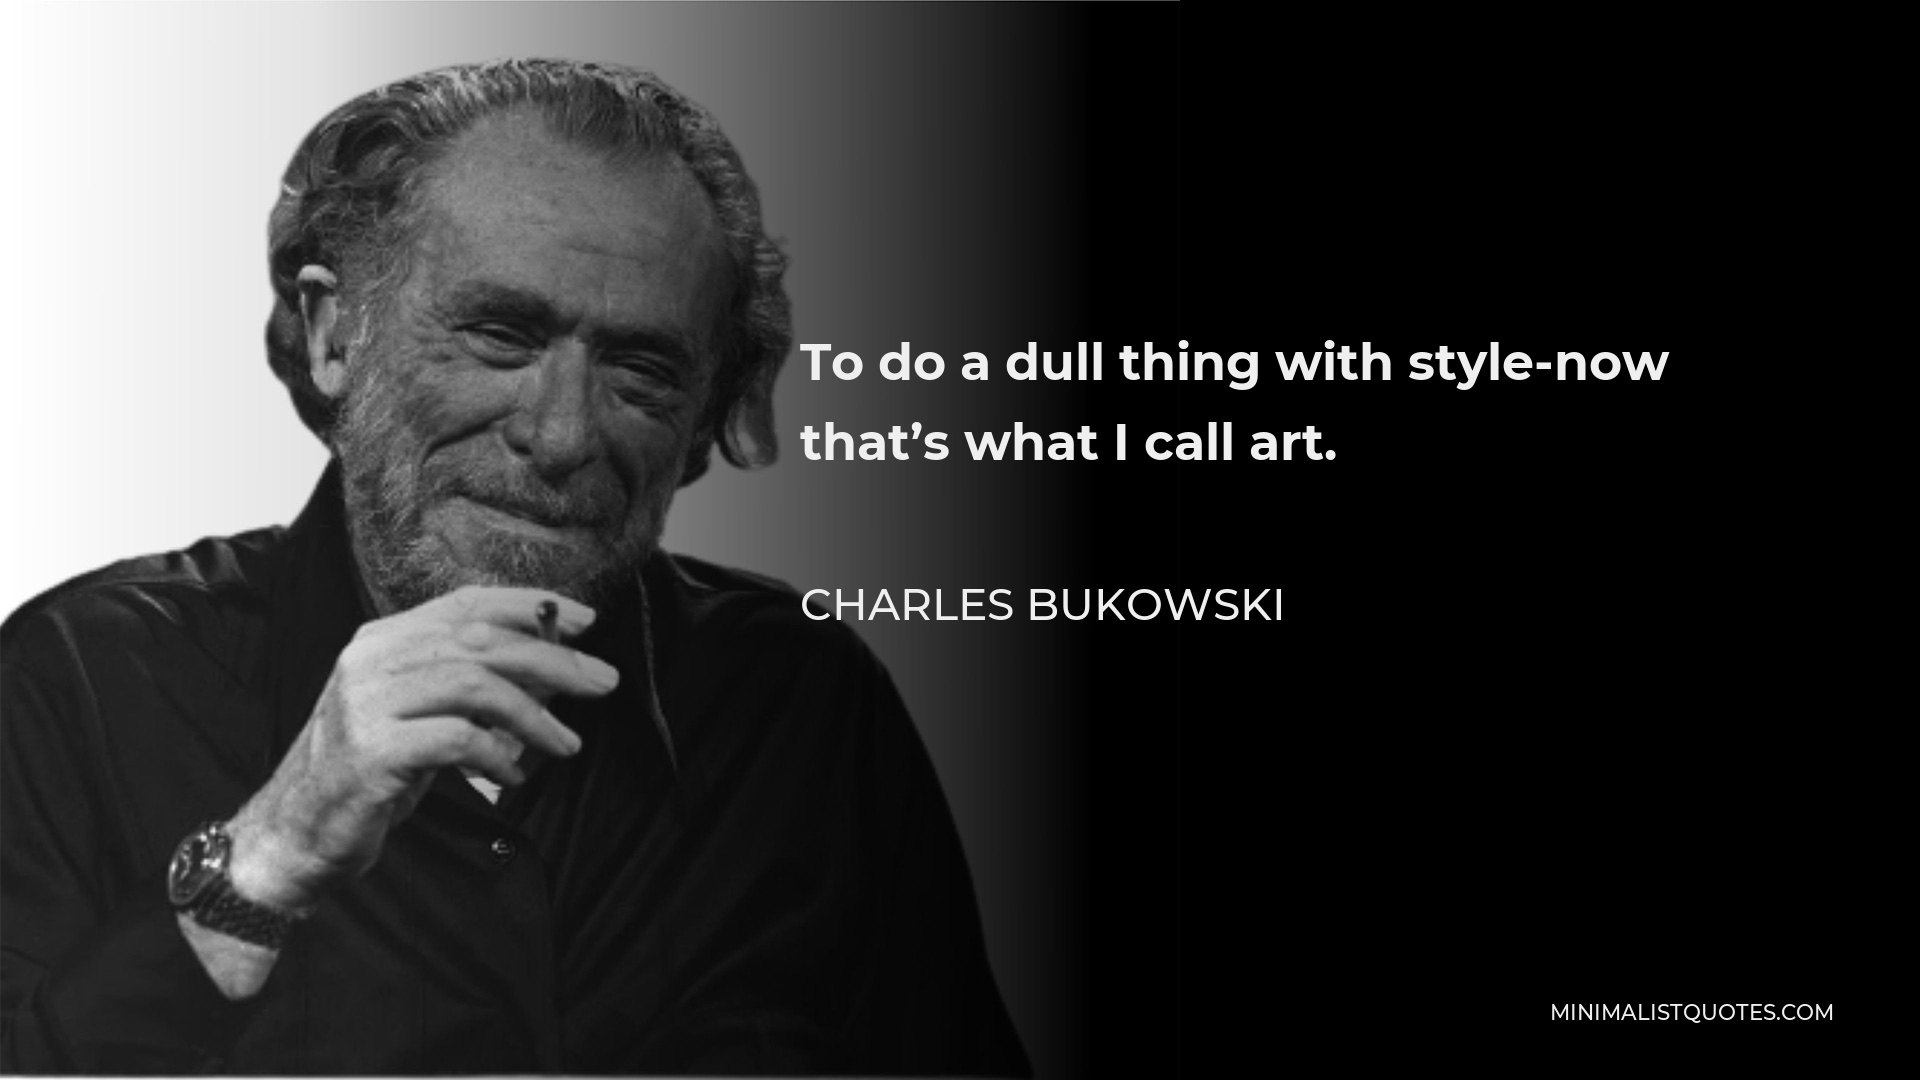 Charles Bukowski Quote - To do a dull thing with style-now that’s what I call art.